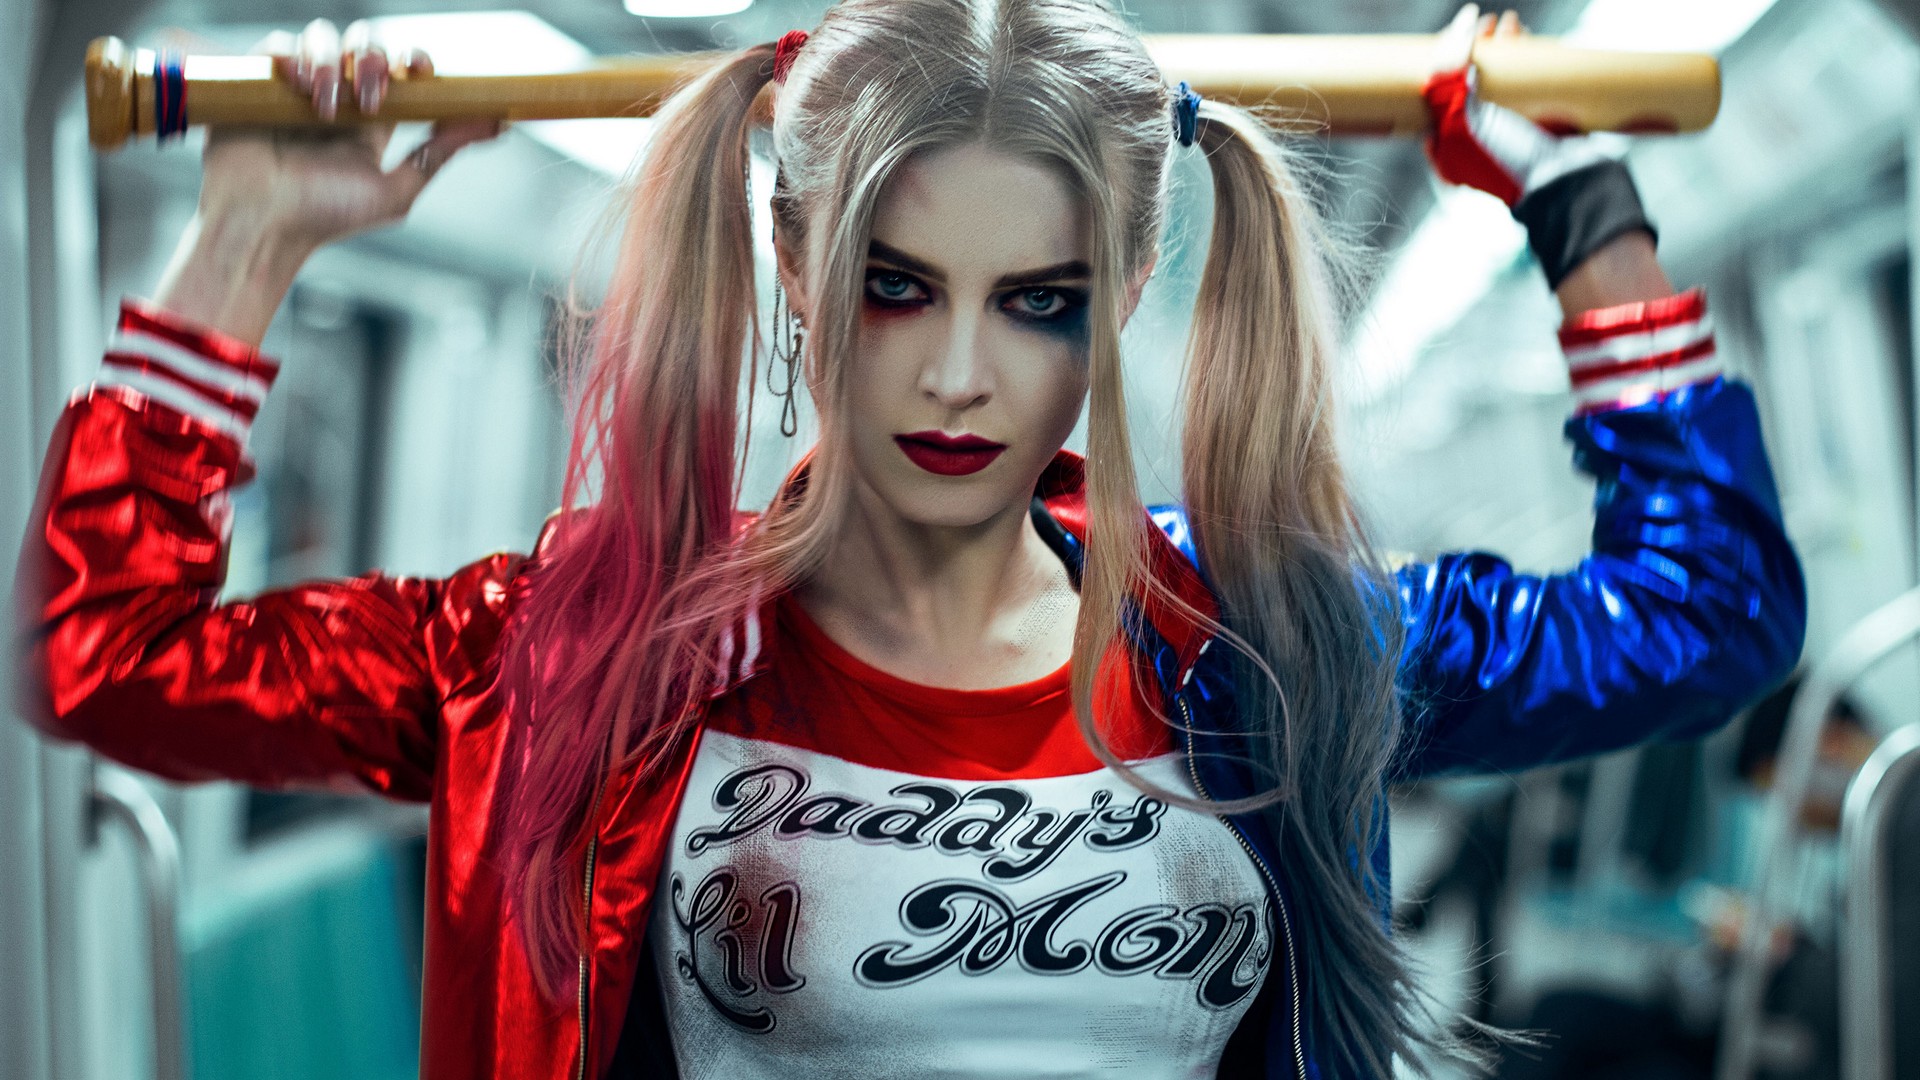 Harley Quinn Makeup Wallpaper with image resolution 1920x1080 pixel. You can use this wallpaper as background for your desktop Computer Screensavers, Android or iPhone smartphones